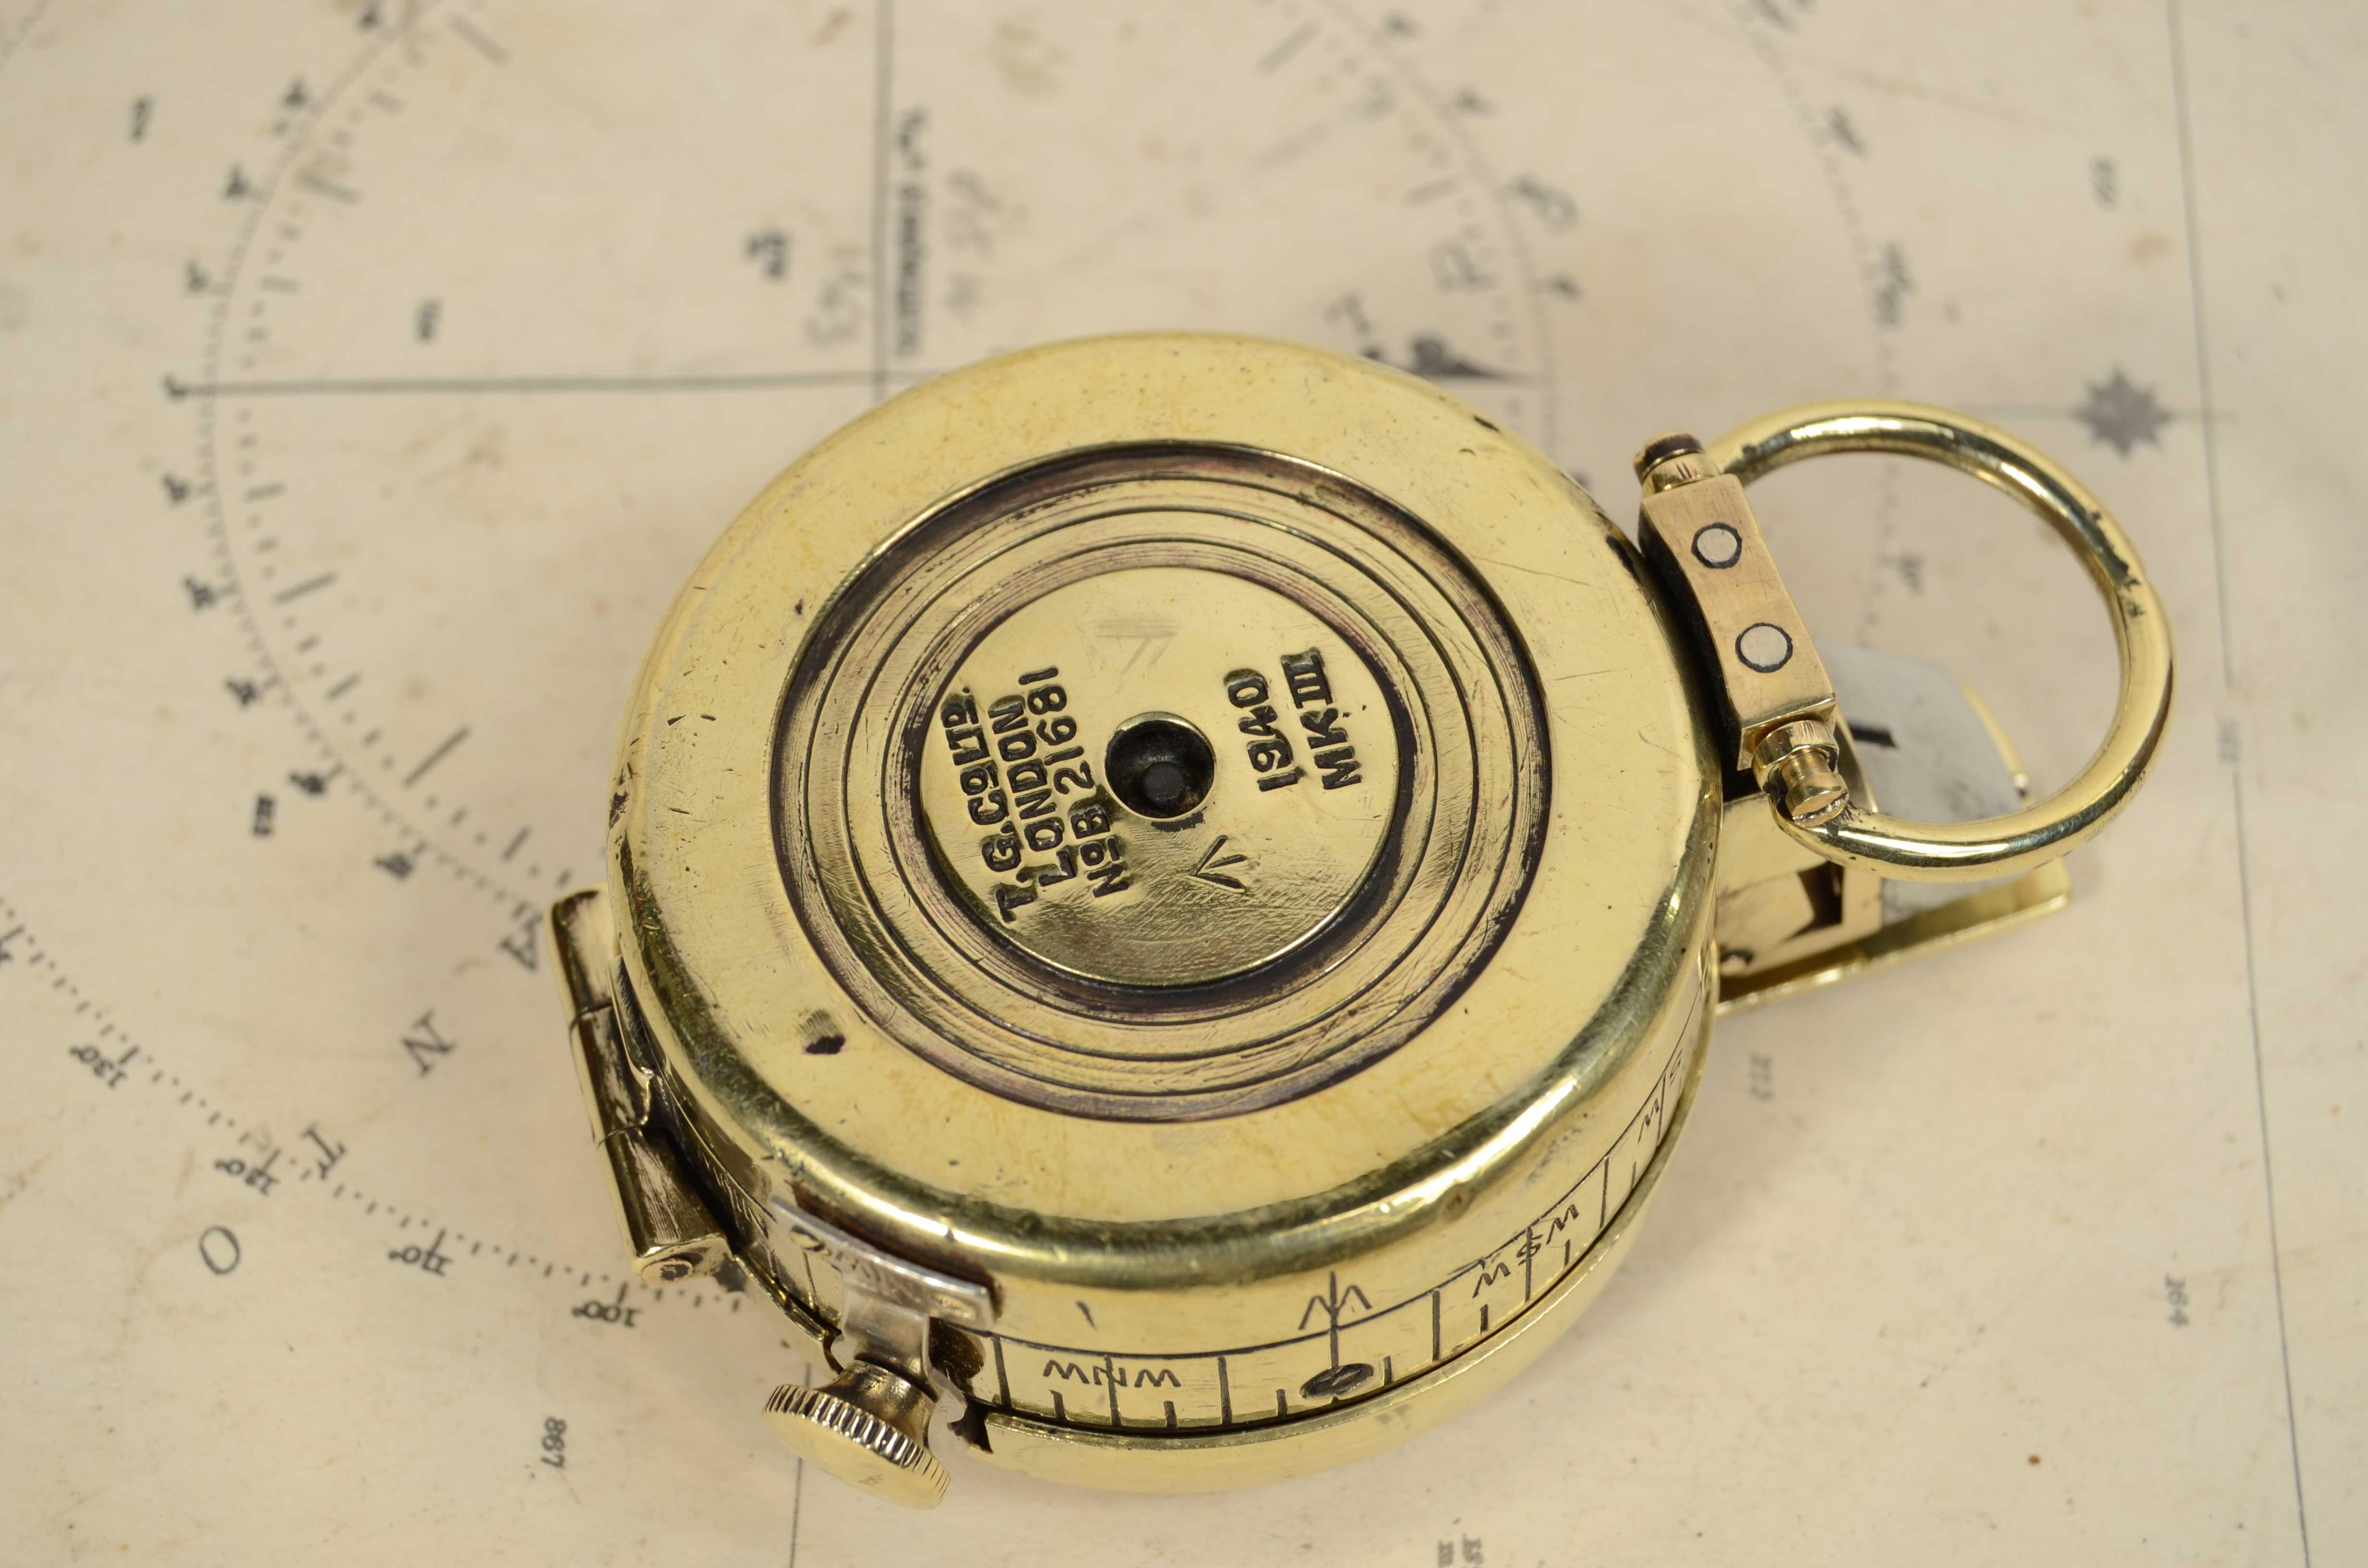 Prismatic compass  by detection signed T.G. Co Ltd London no. B 21681 1940 MK For Sale 10